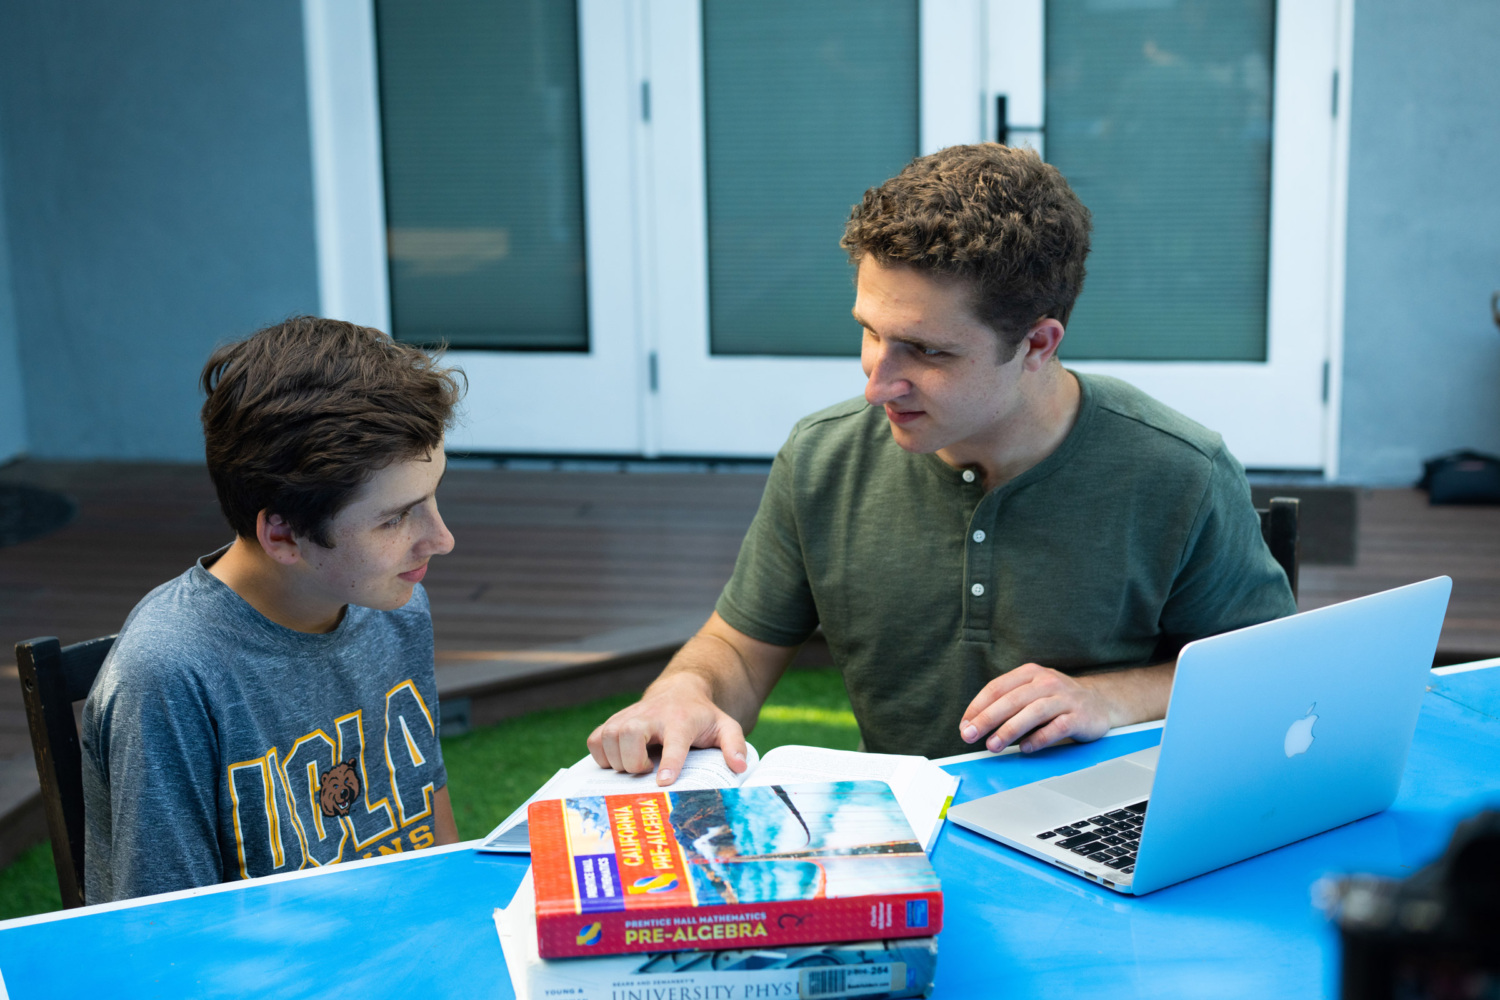 Jonah sits with a younger student at a table with a laptop and textbooks.